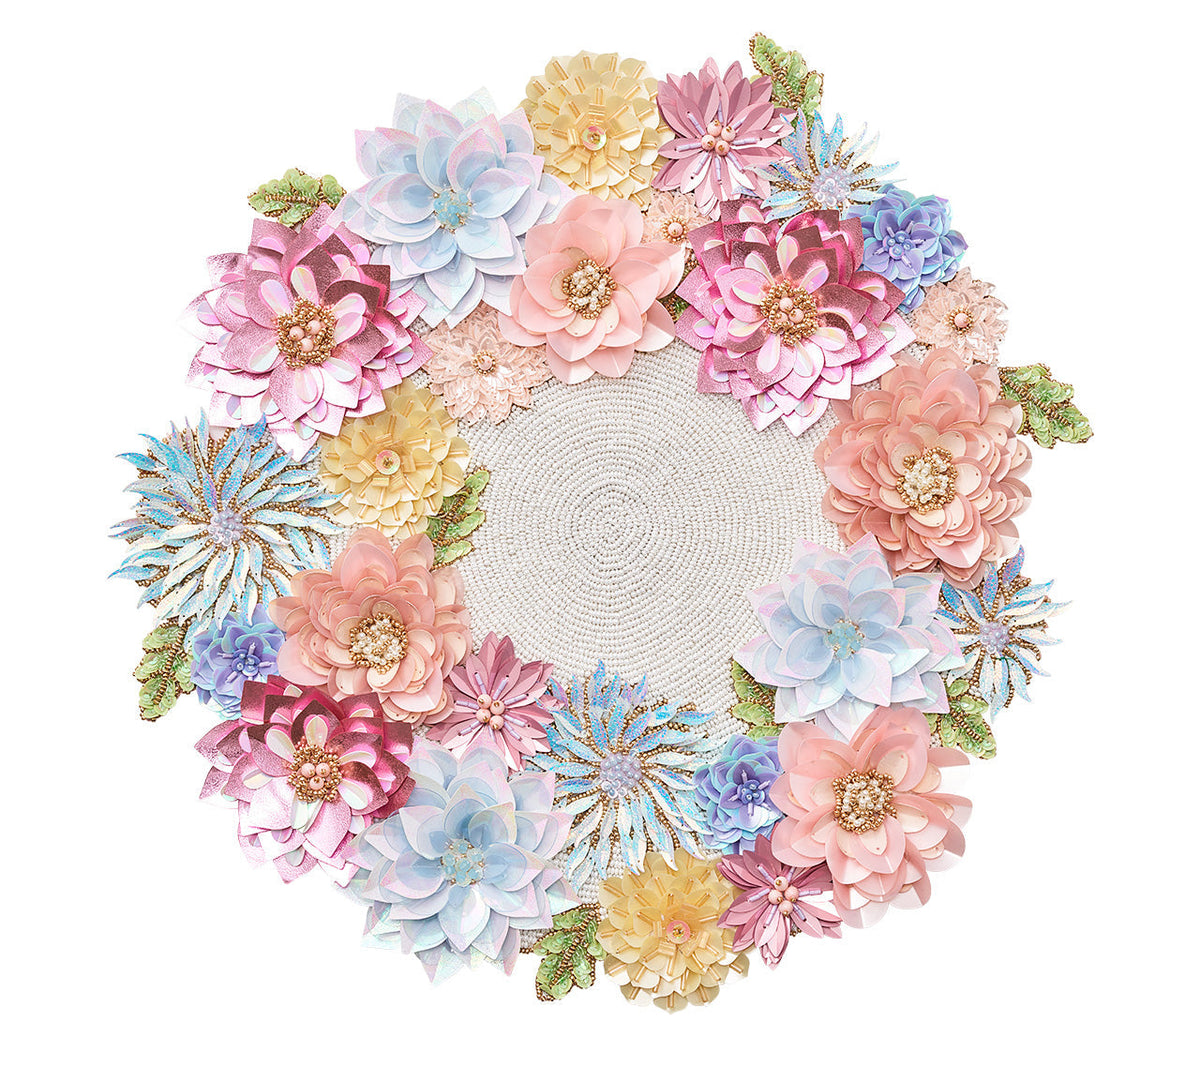 Round Dahlia Placemat with layered pink, blue and yellow florals accented with sequins and beads (97 characters)